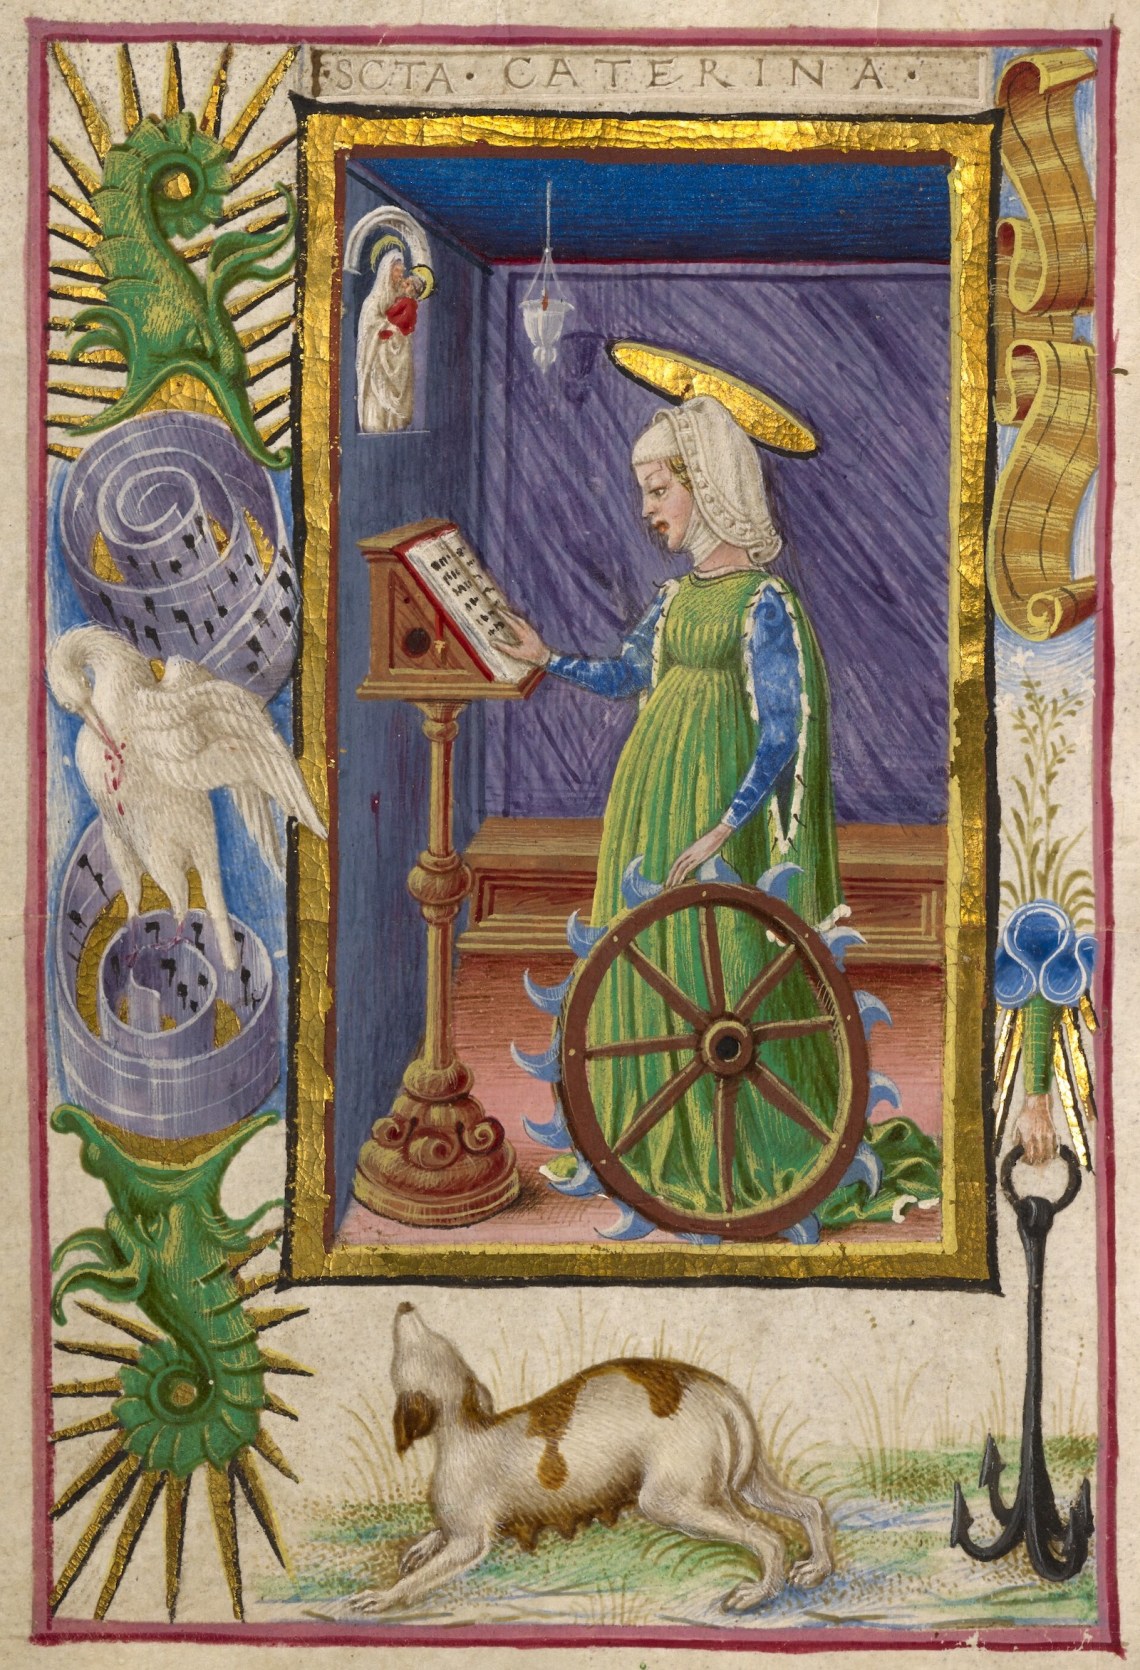 An illustration of Saint Catherine of Alexandria, wearing a green dress, holding a wagon wheel and reading a book on a pedestal